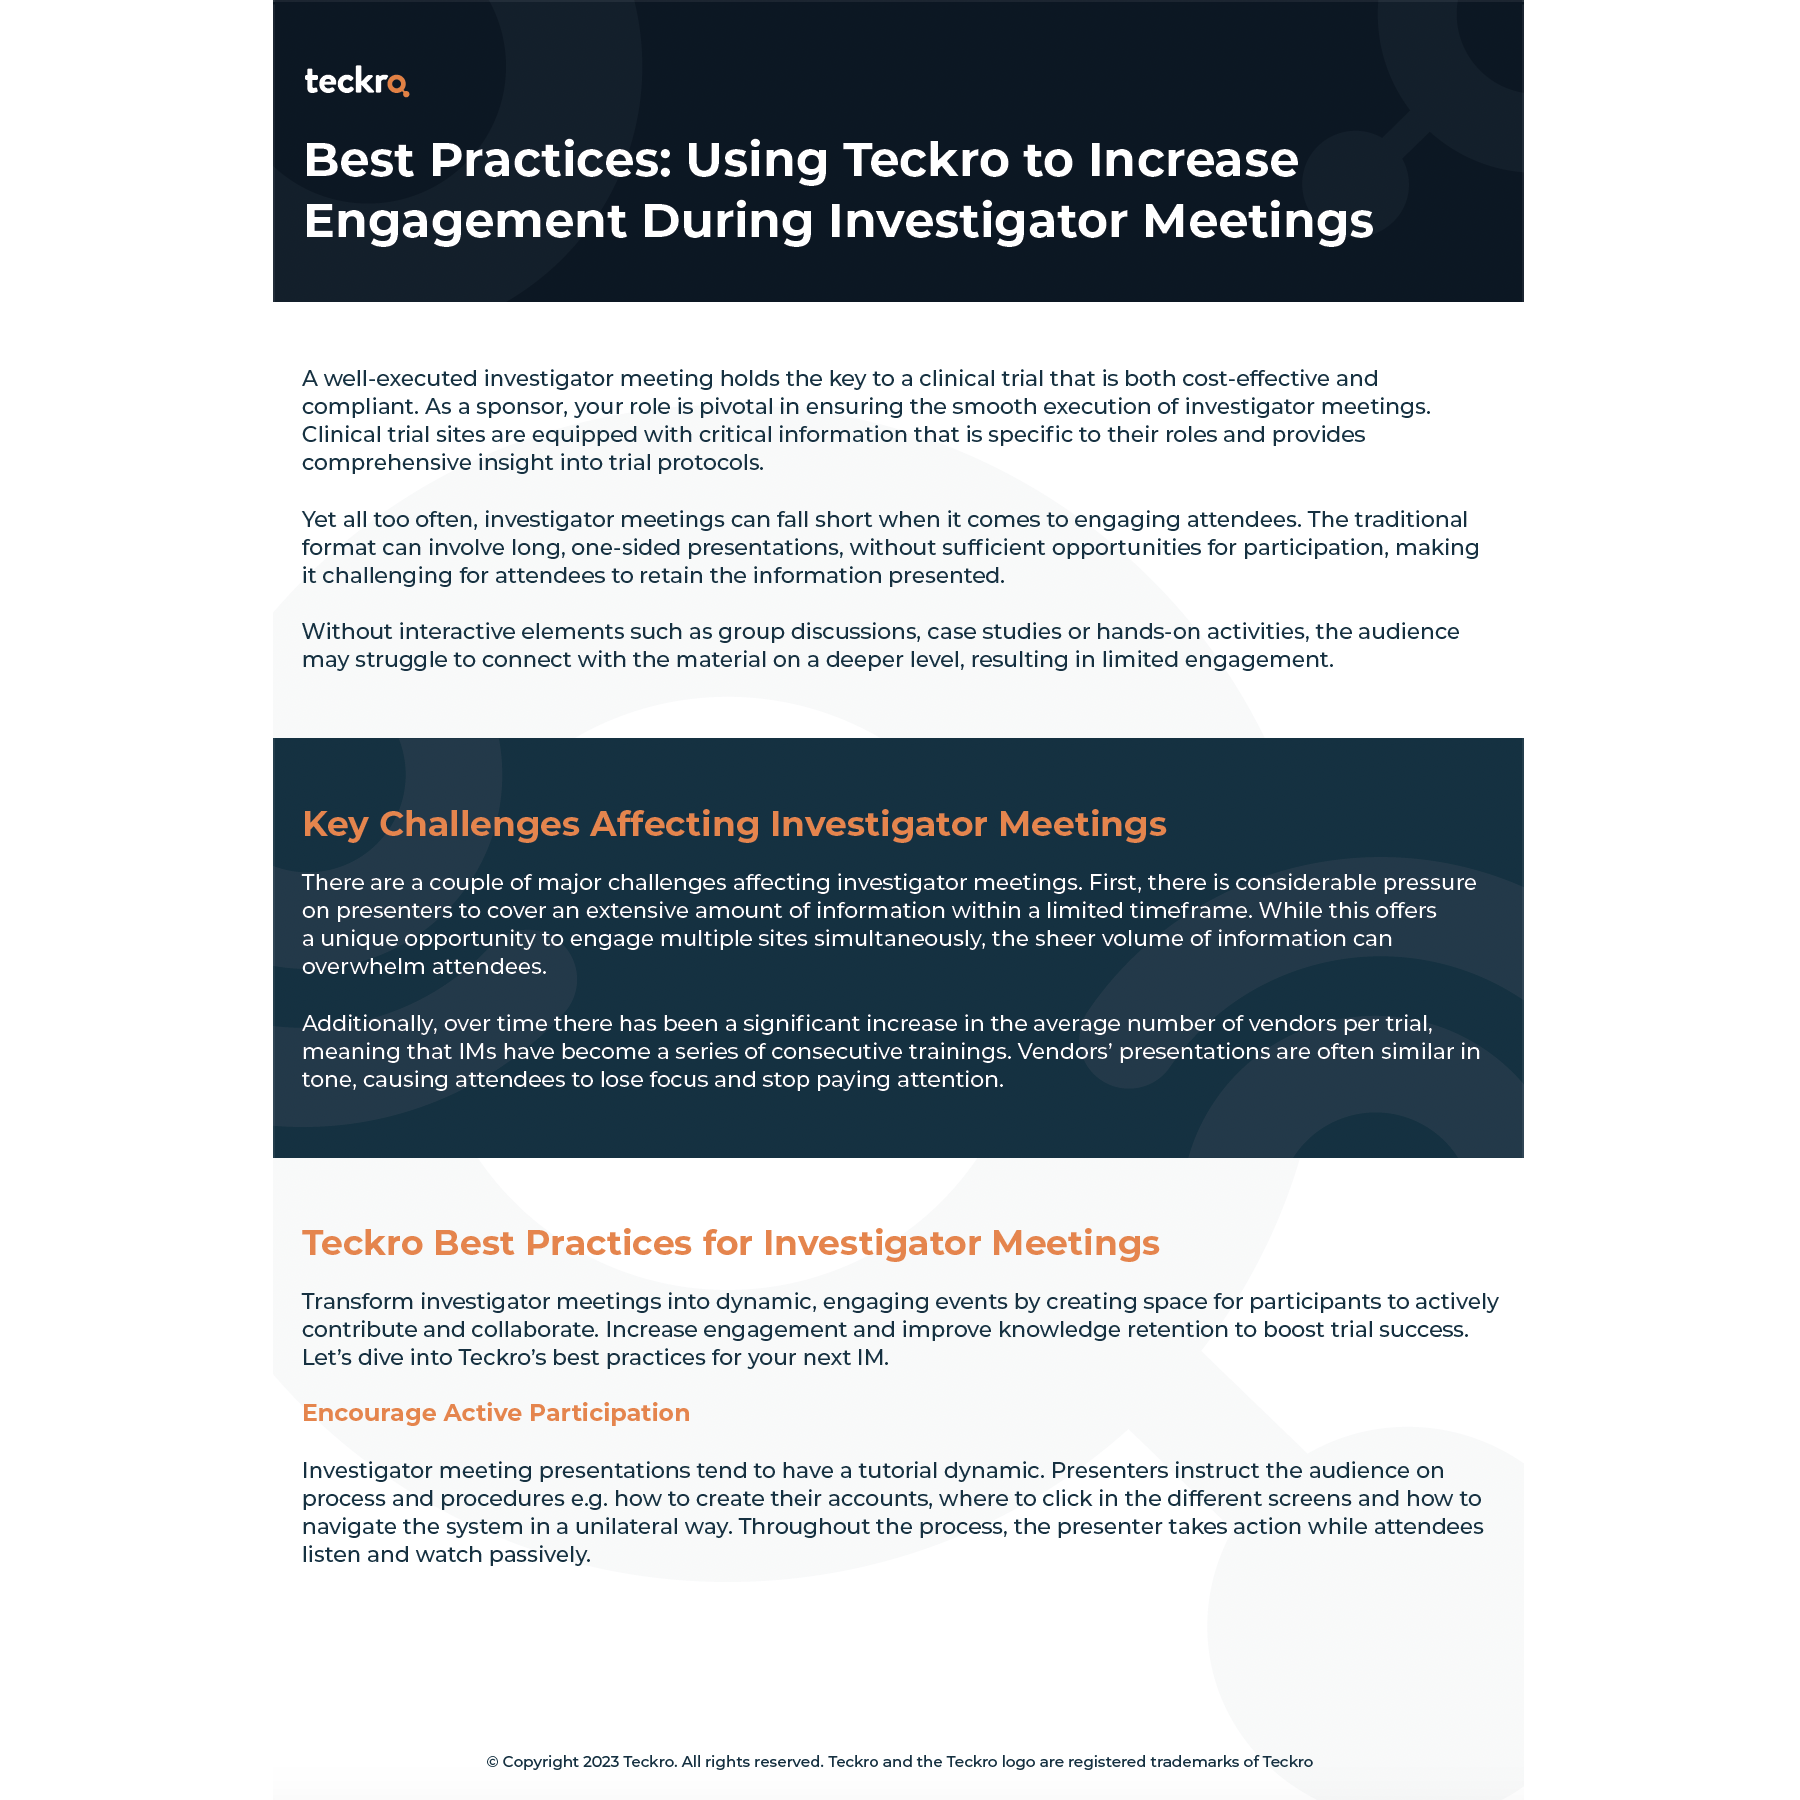 Using Teckro to Increase Engagement During Investigator Meetings cover